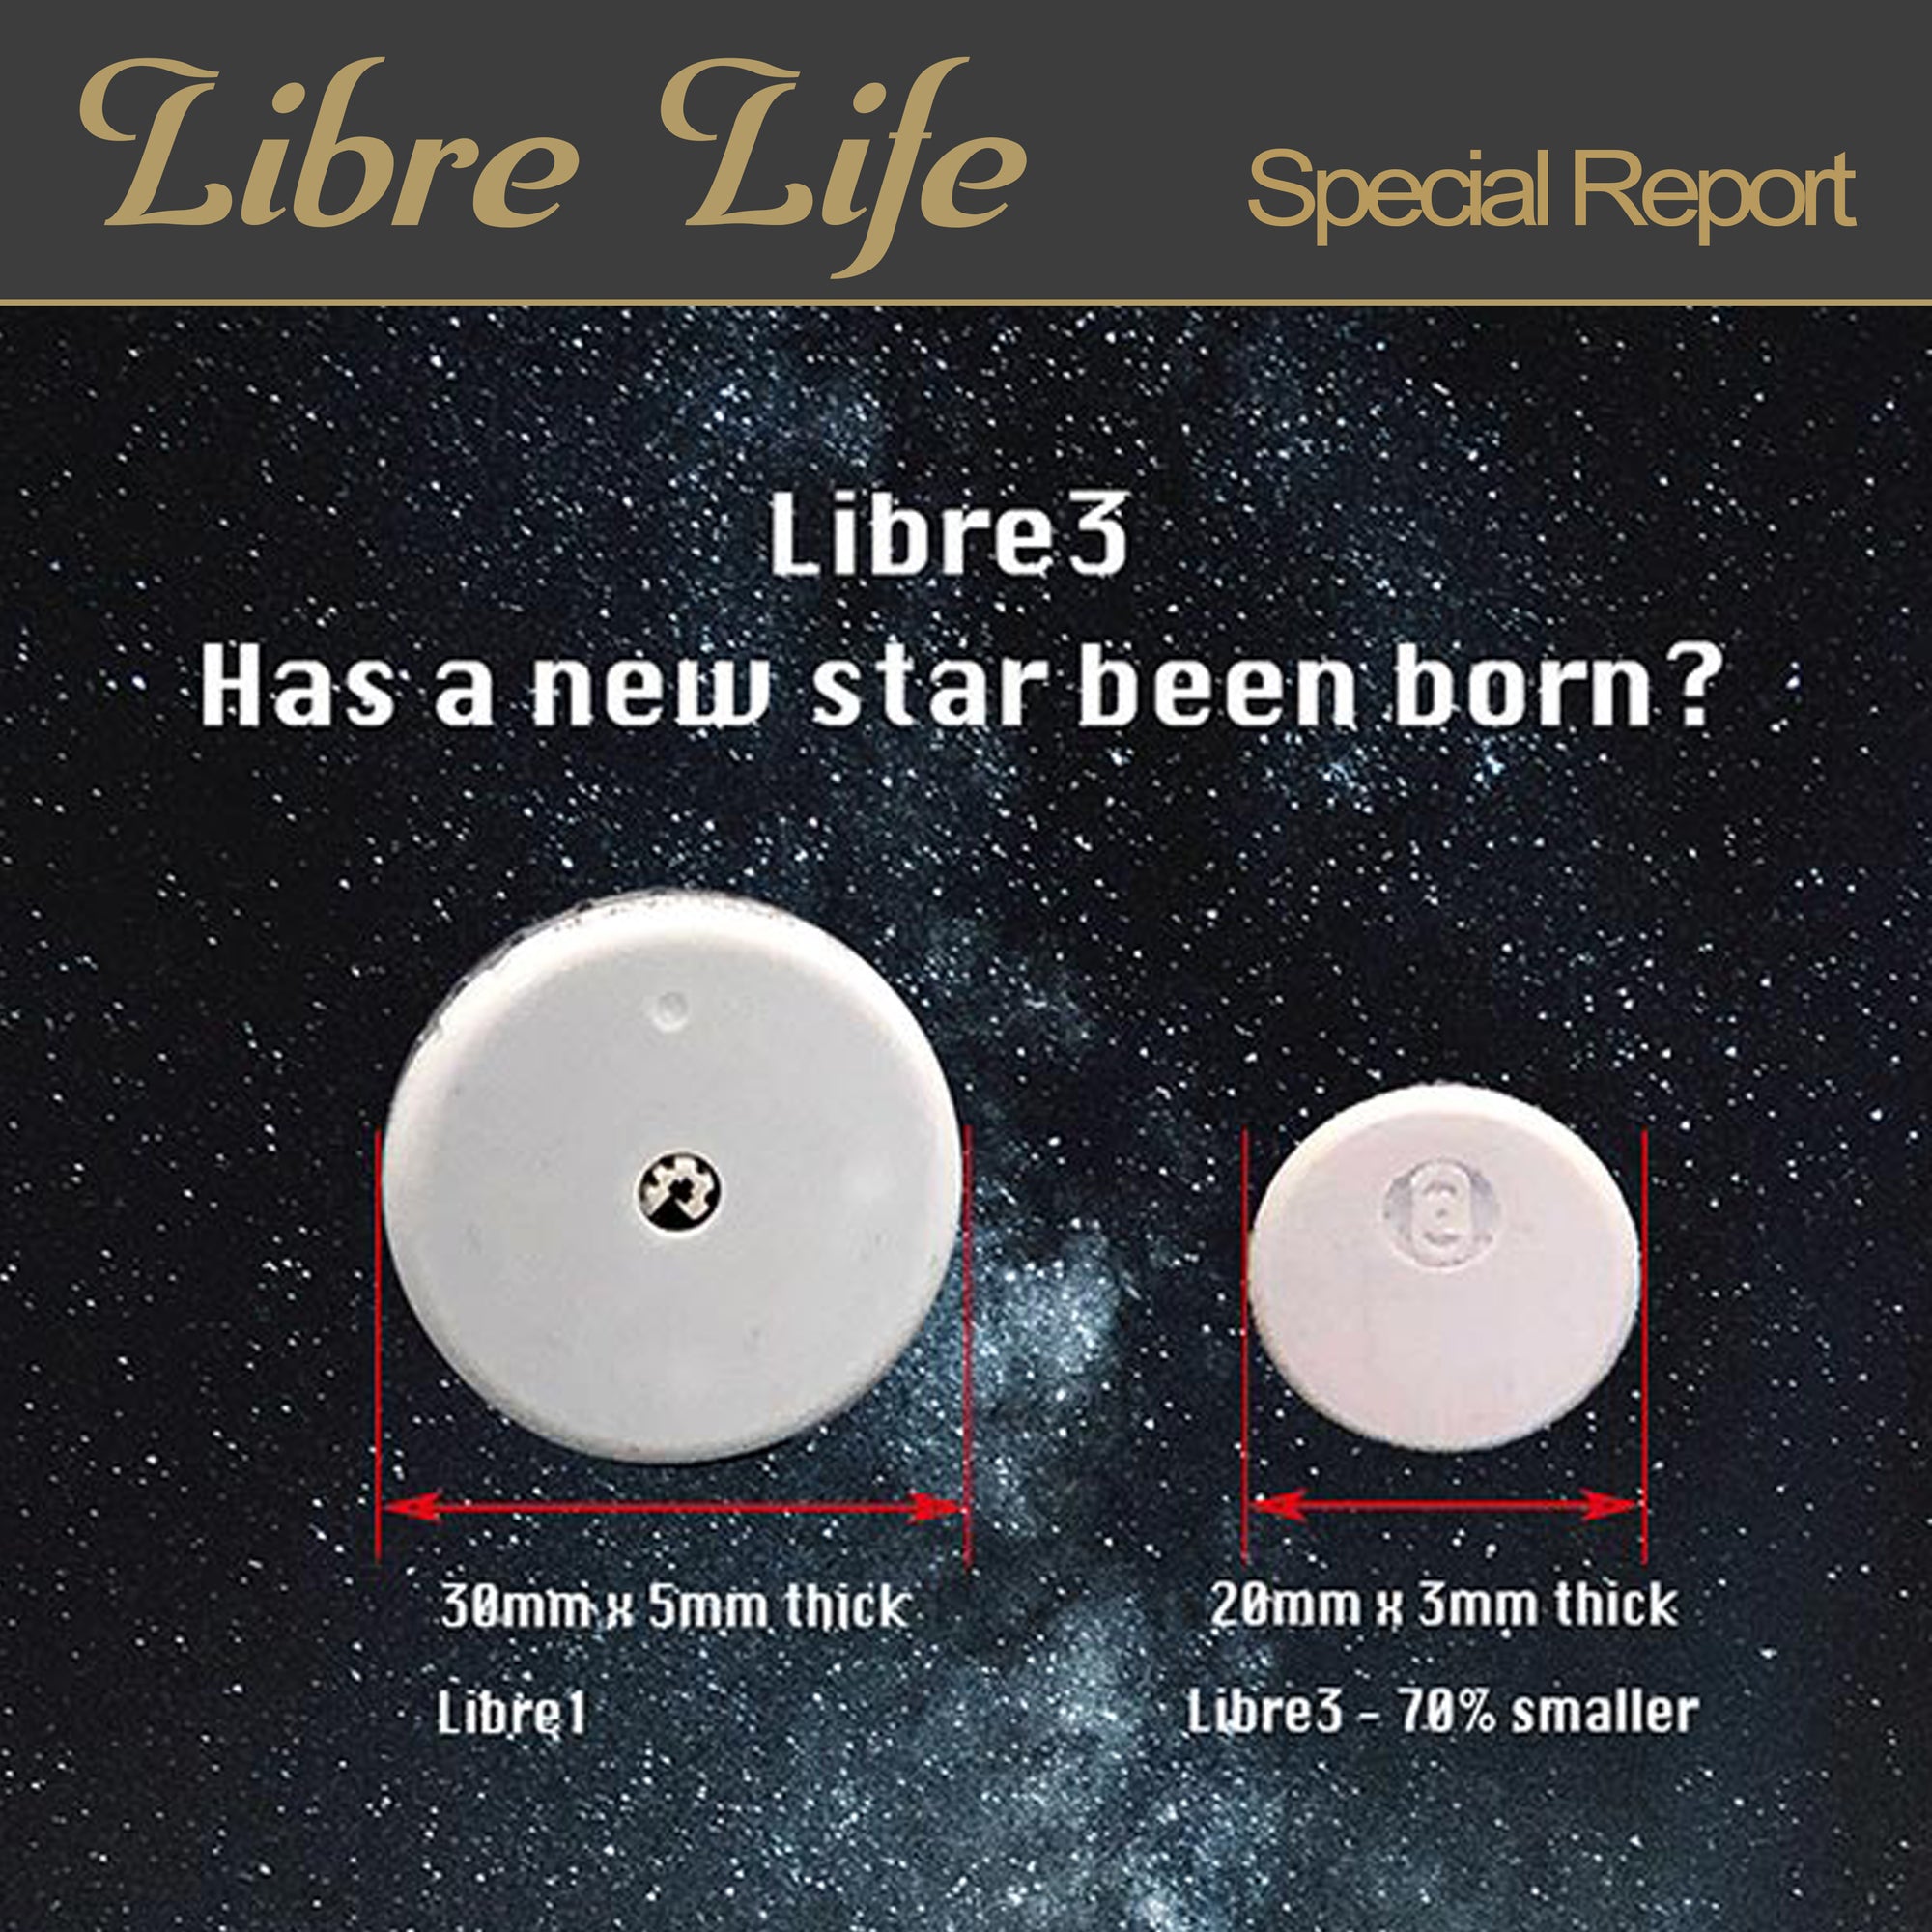 Special Report on Libre 3 - Has a new star been born?